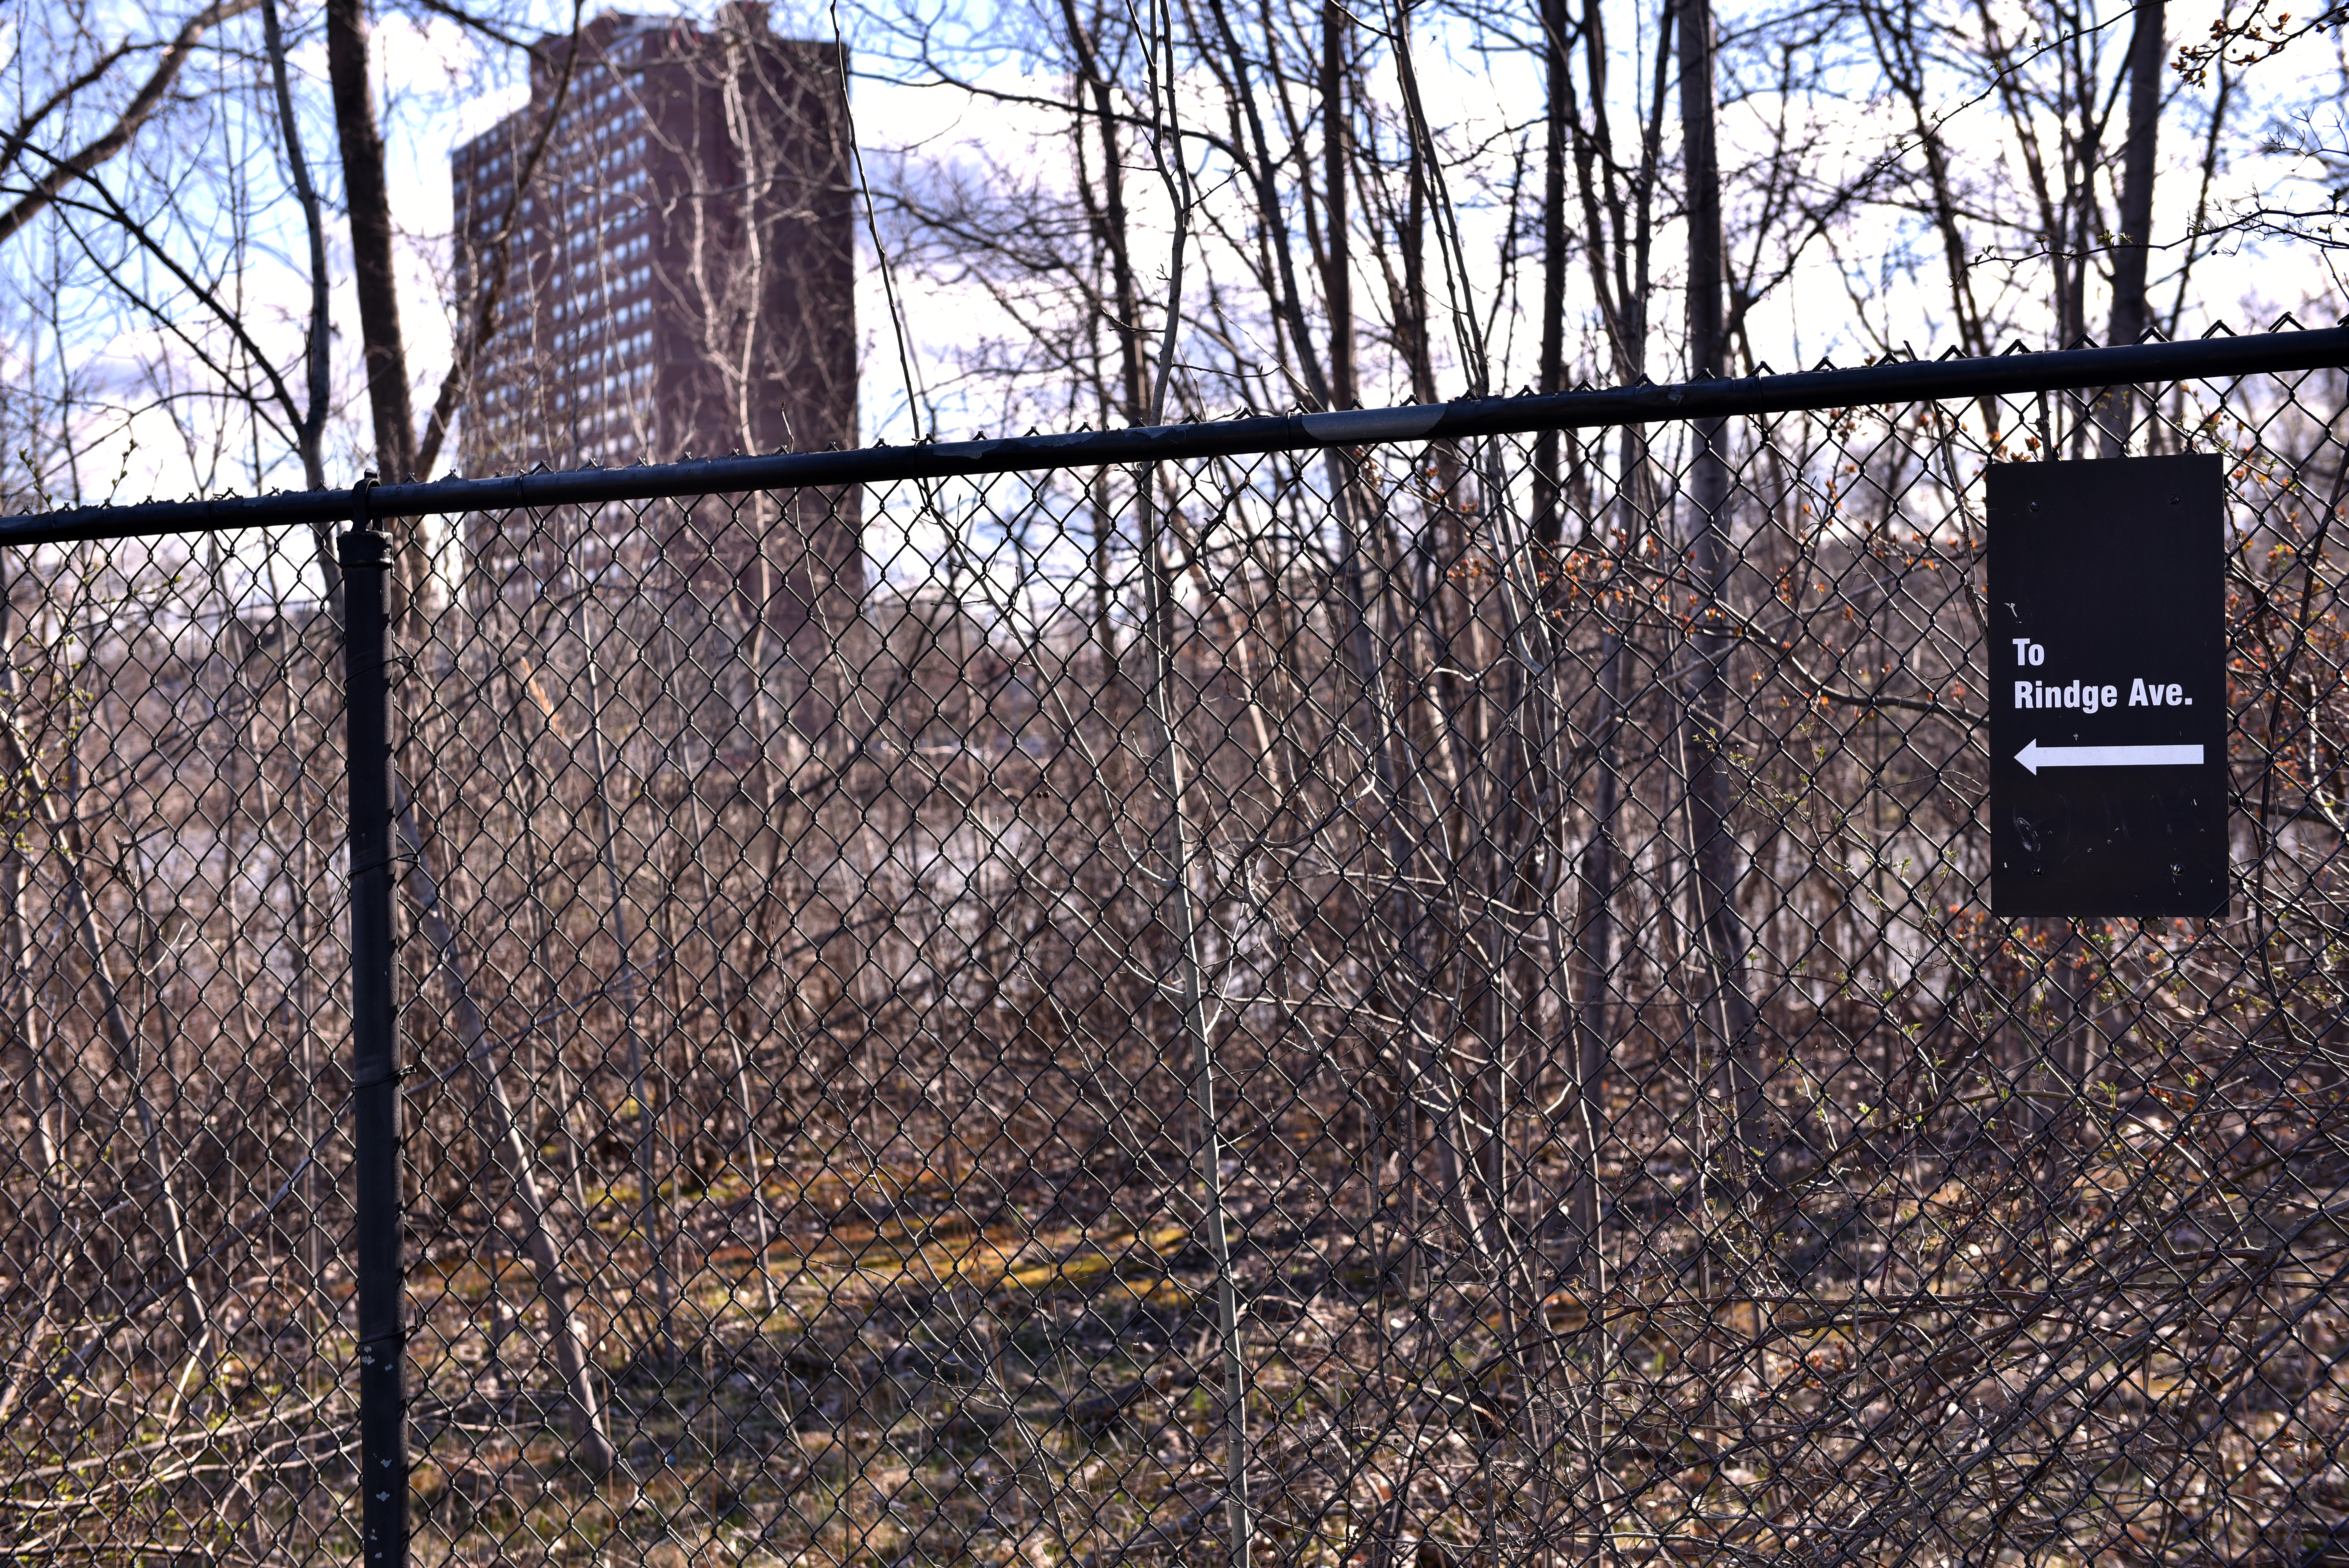 Chain-link fence in front of pond and scrub, sign says To Rindge Avenue. High rise apartments in distance.